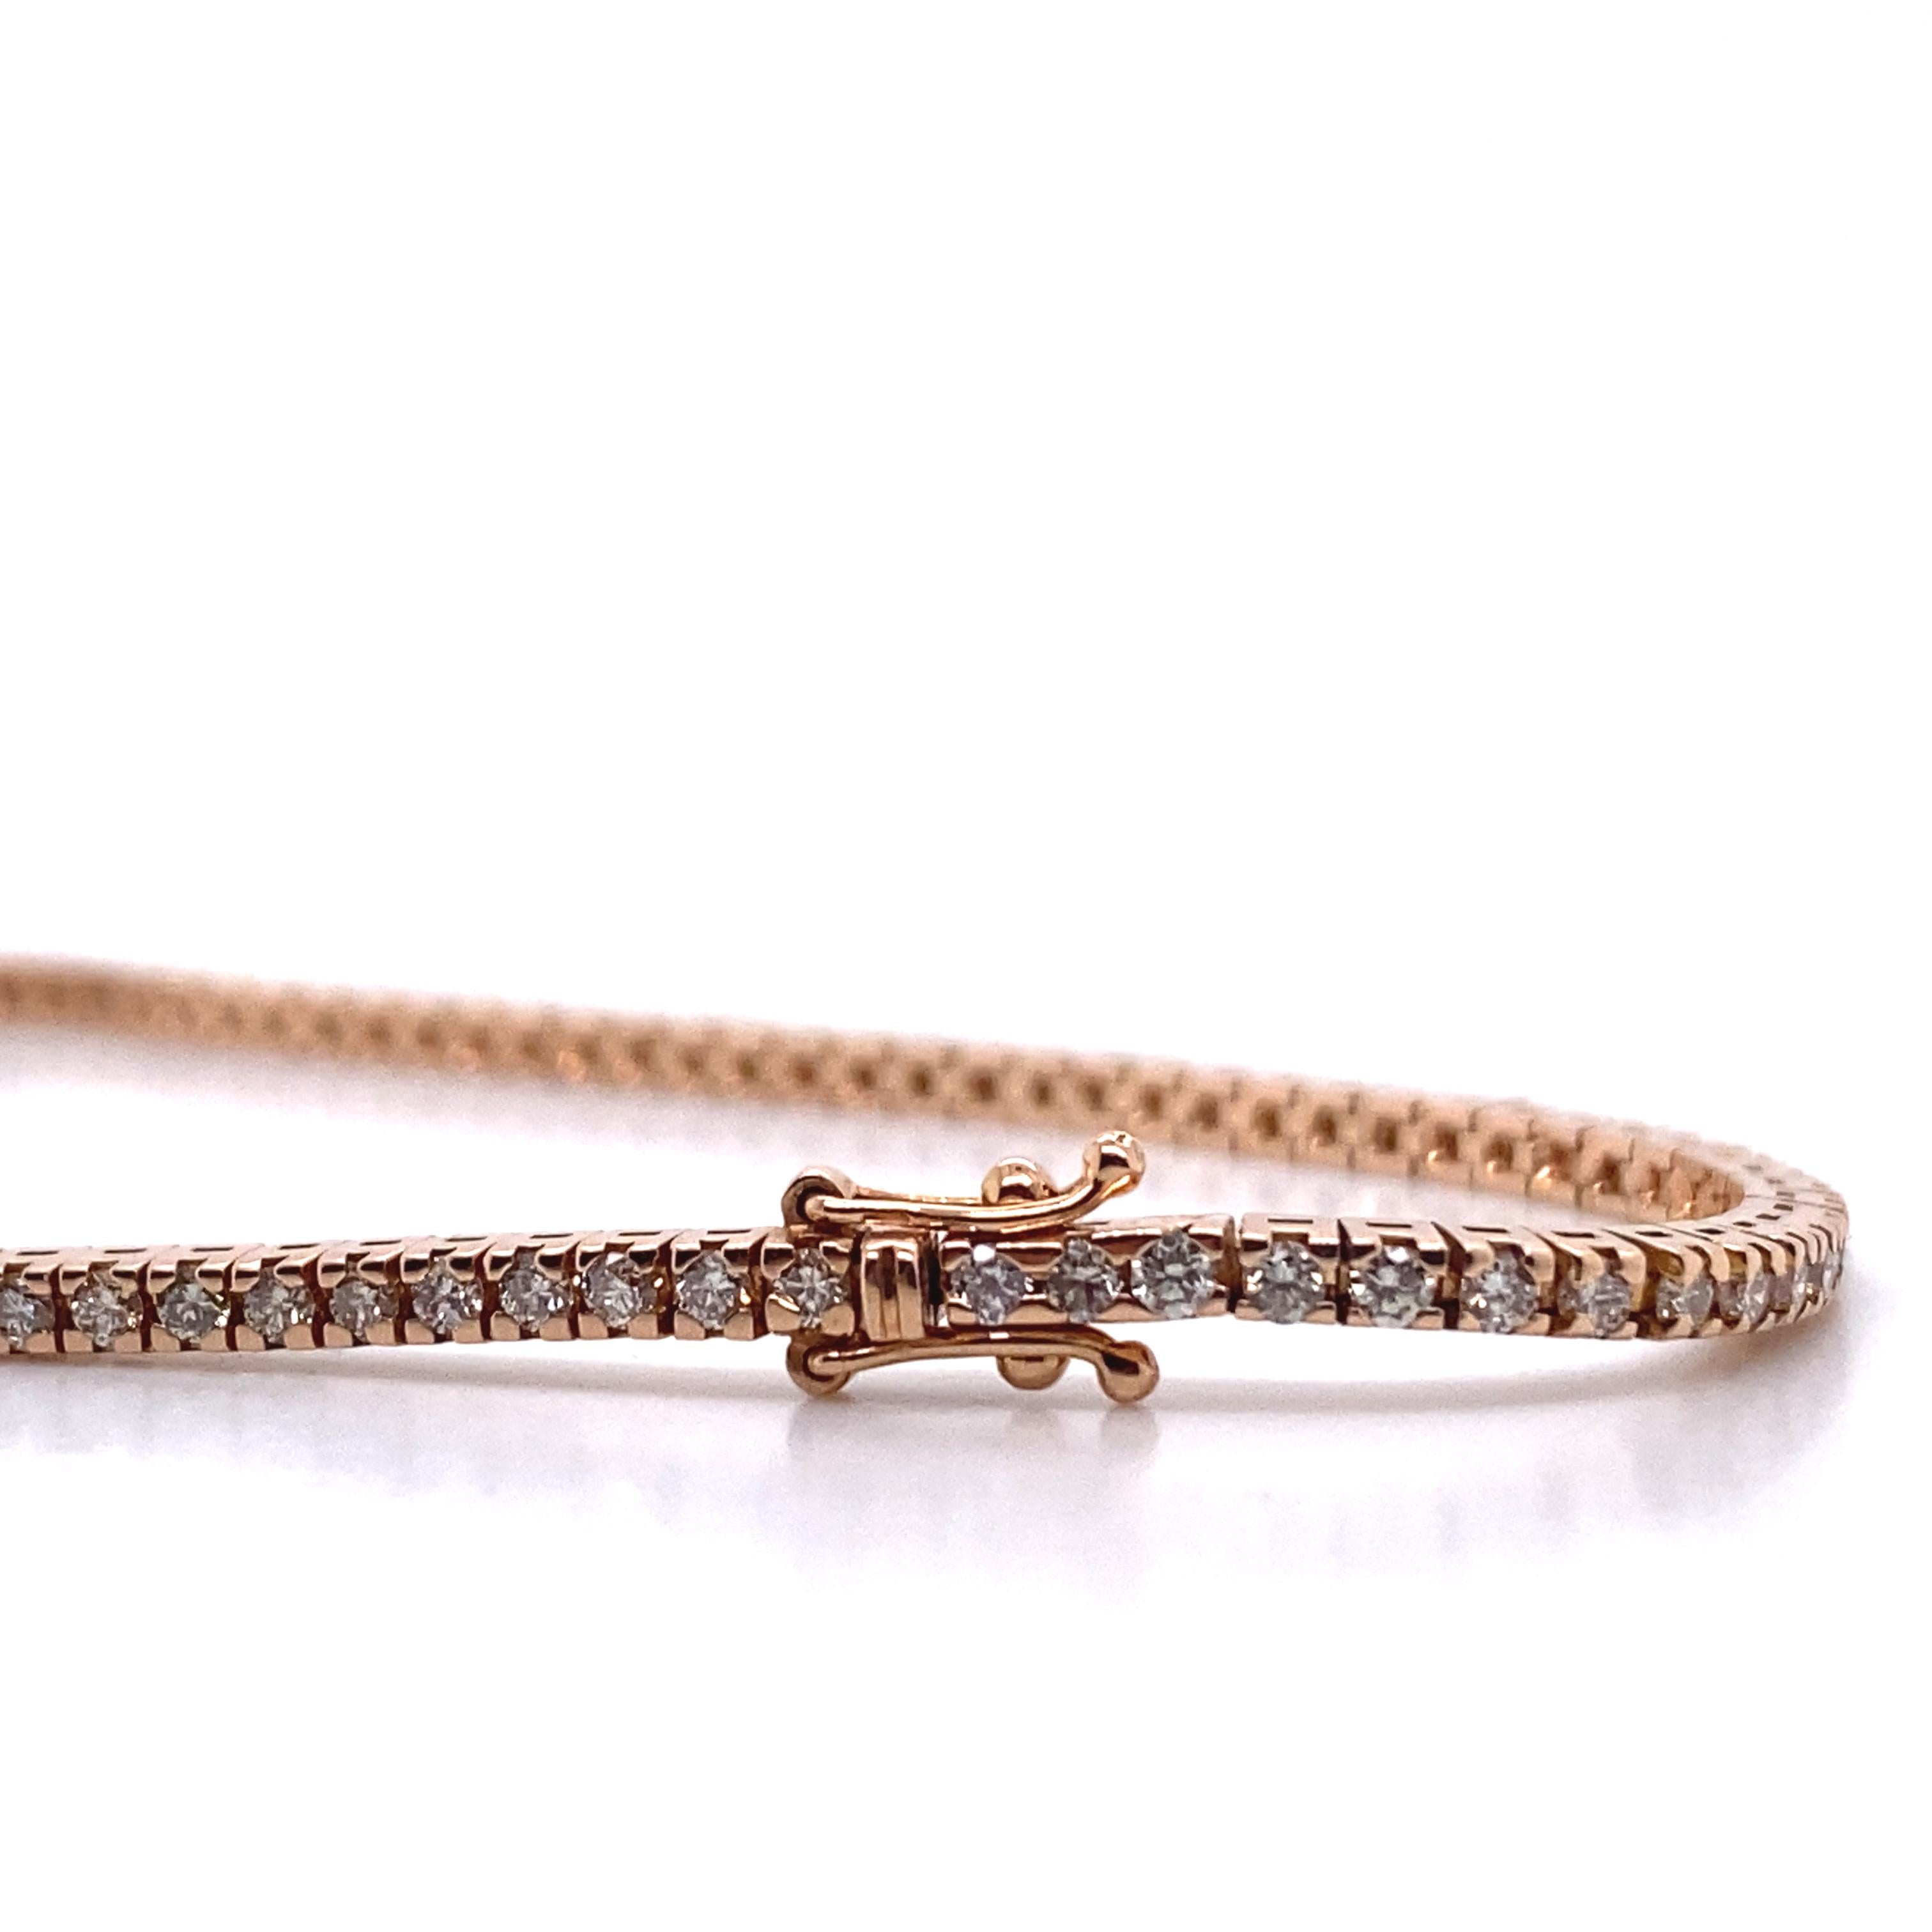 Understated and elegant, this tennis bracelet features 1.4 carats of G VS-rated diamonds set in stunning 18-karat rose gold; it is 18 cm long. It was hand-made using traditional methods and designed and produced in Palermo, Sicily by master